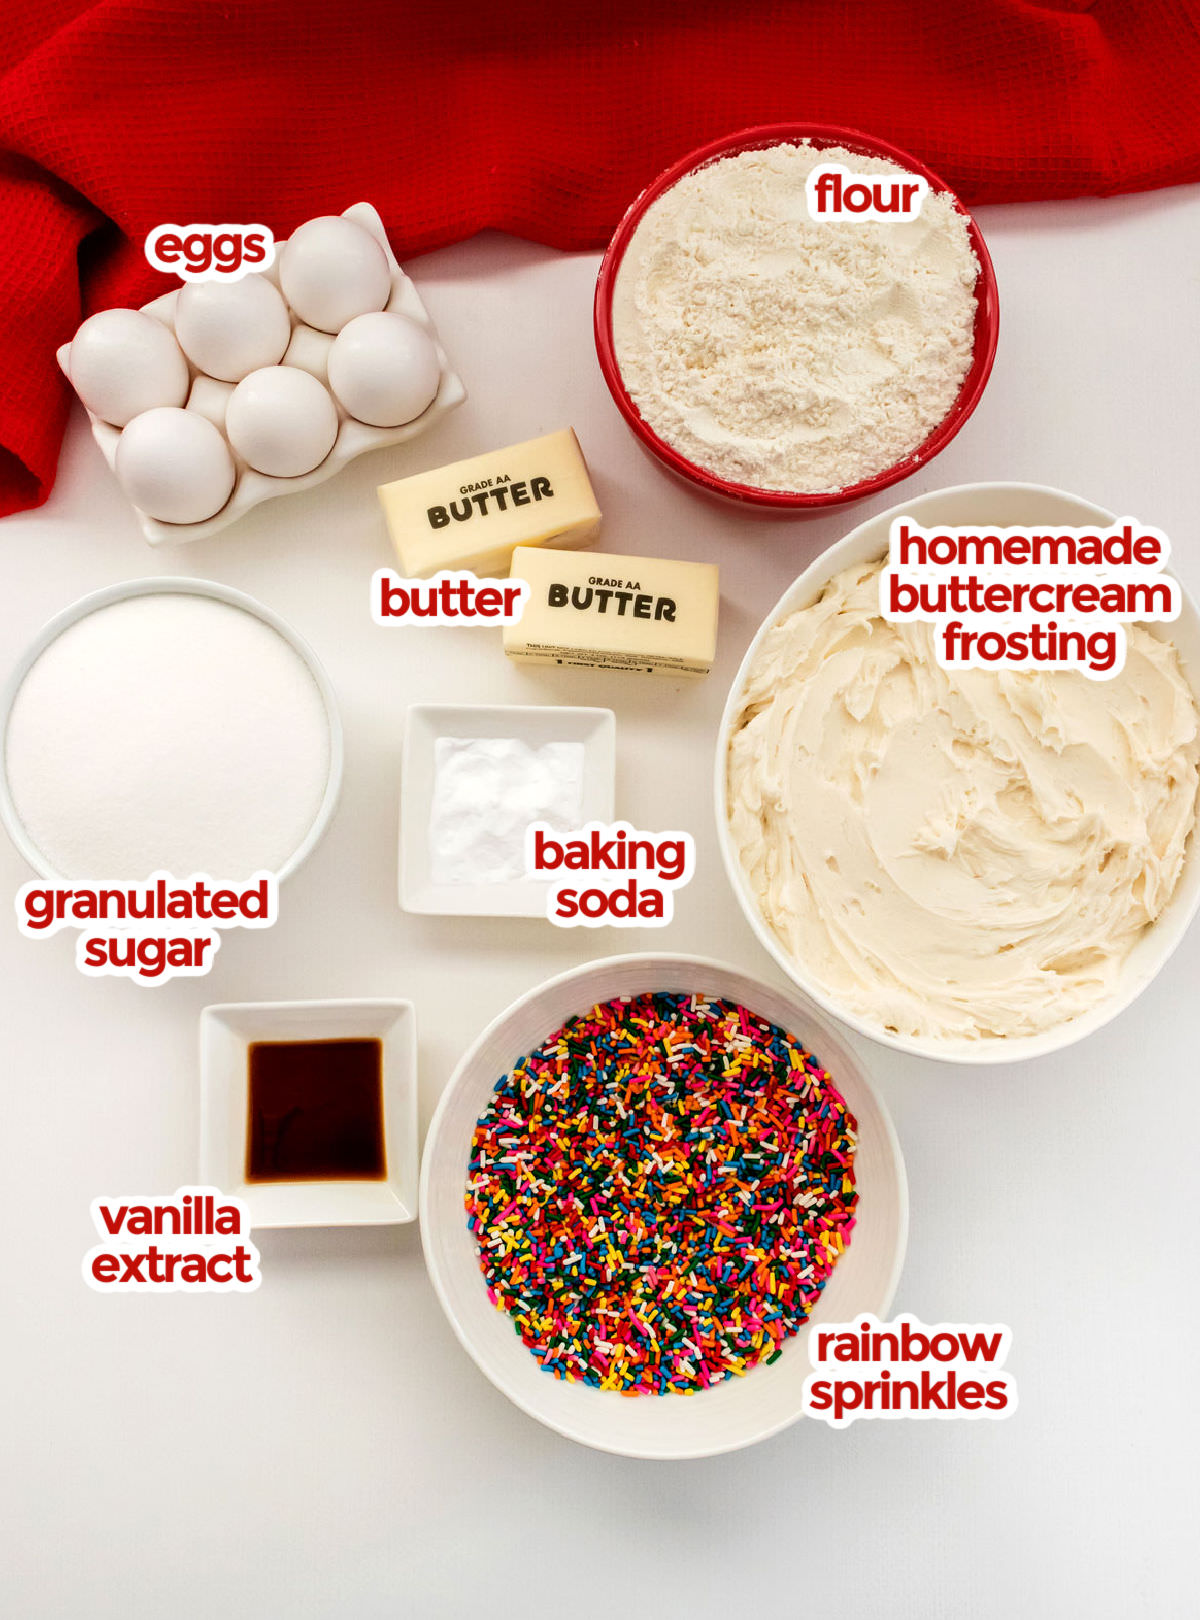 All the ingredients you will need to make Funfetti Sugar Cookie Bars including eggs, butter, flour, sugar, vanilla, baking soda, buttercream frosting and sprinkles.